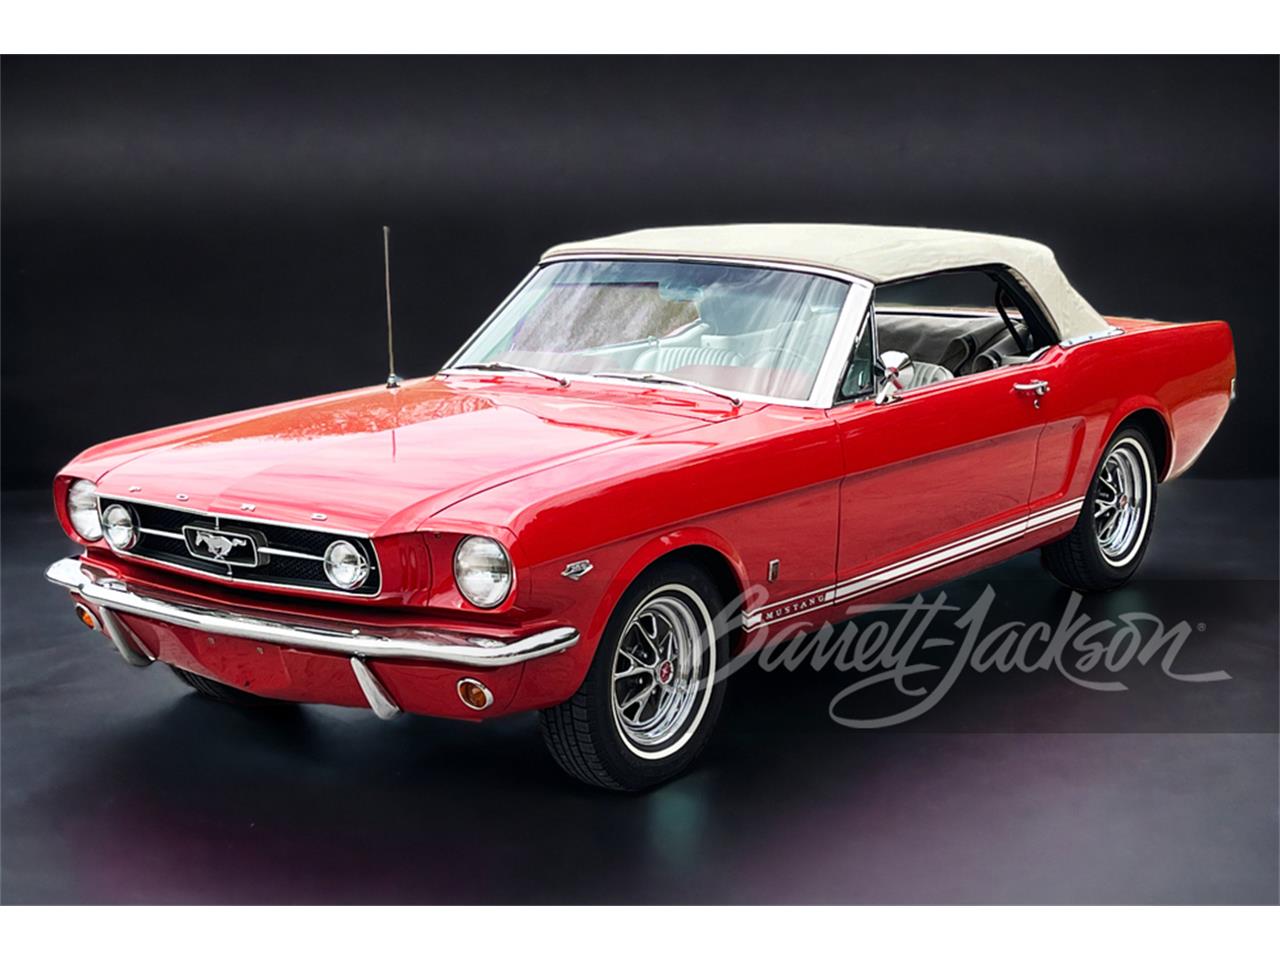 For Sale at Auction: 1965 Ford Mustang GT in Scottsdale, Arizona for sale in Scottsdale, AZ